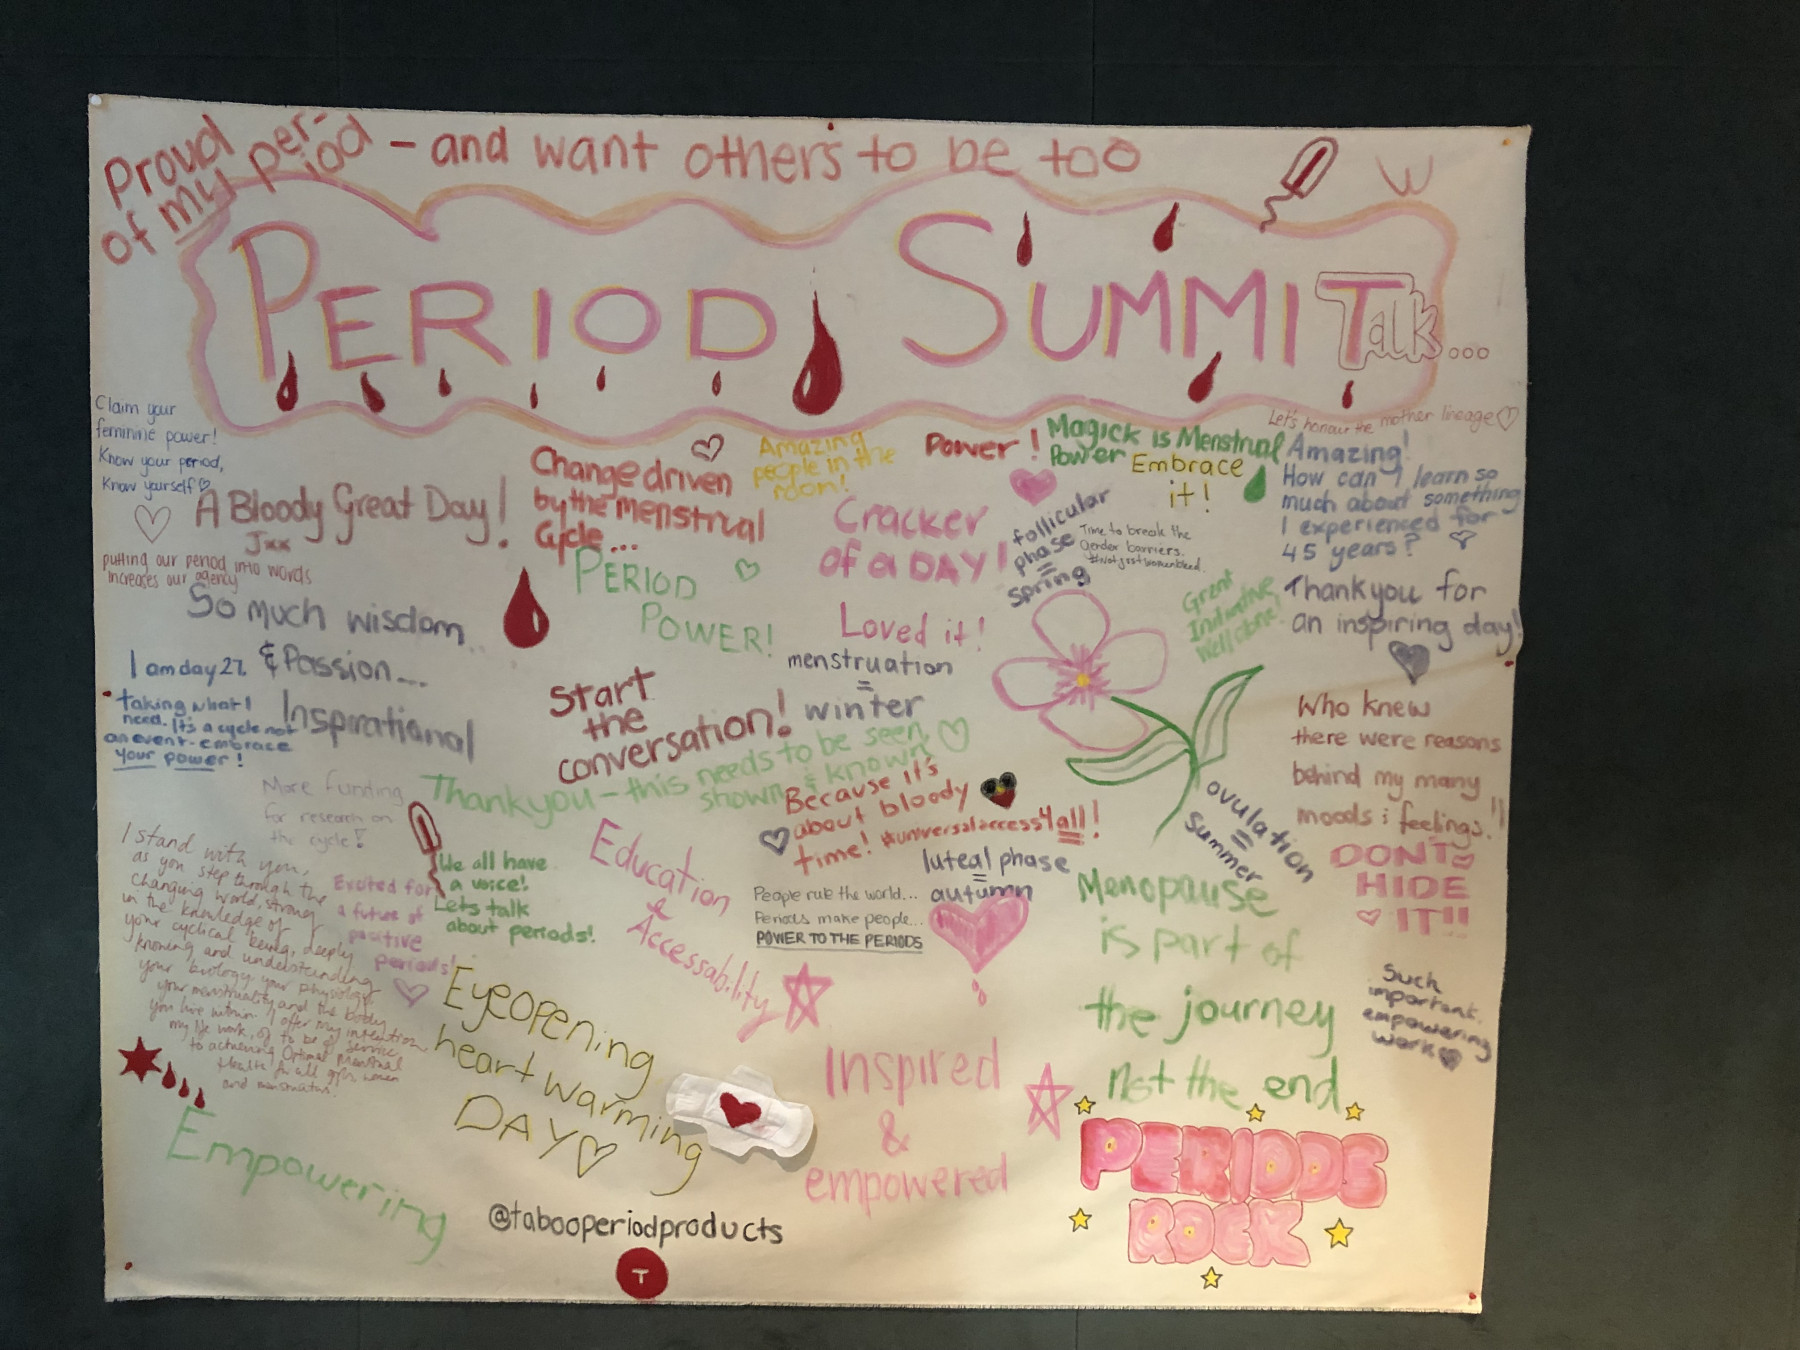 First National Period Summit a bloody good day! Commissioner for